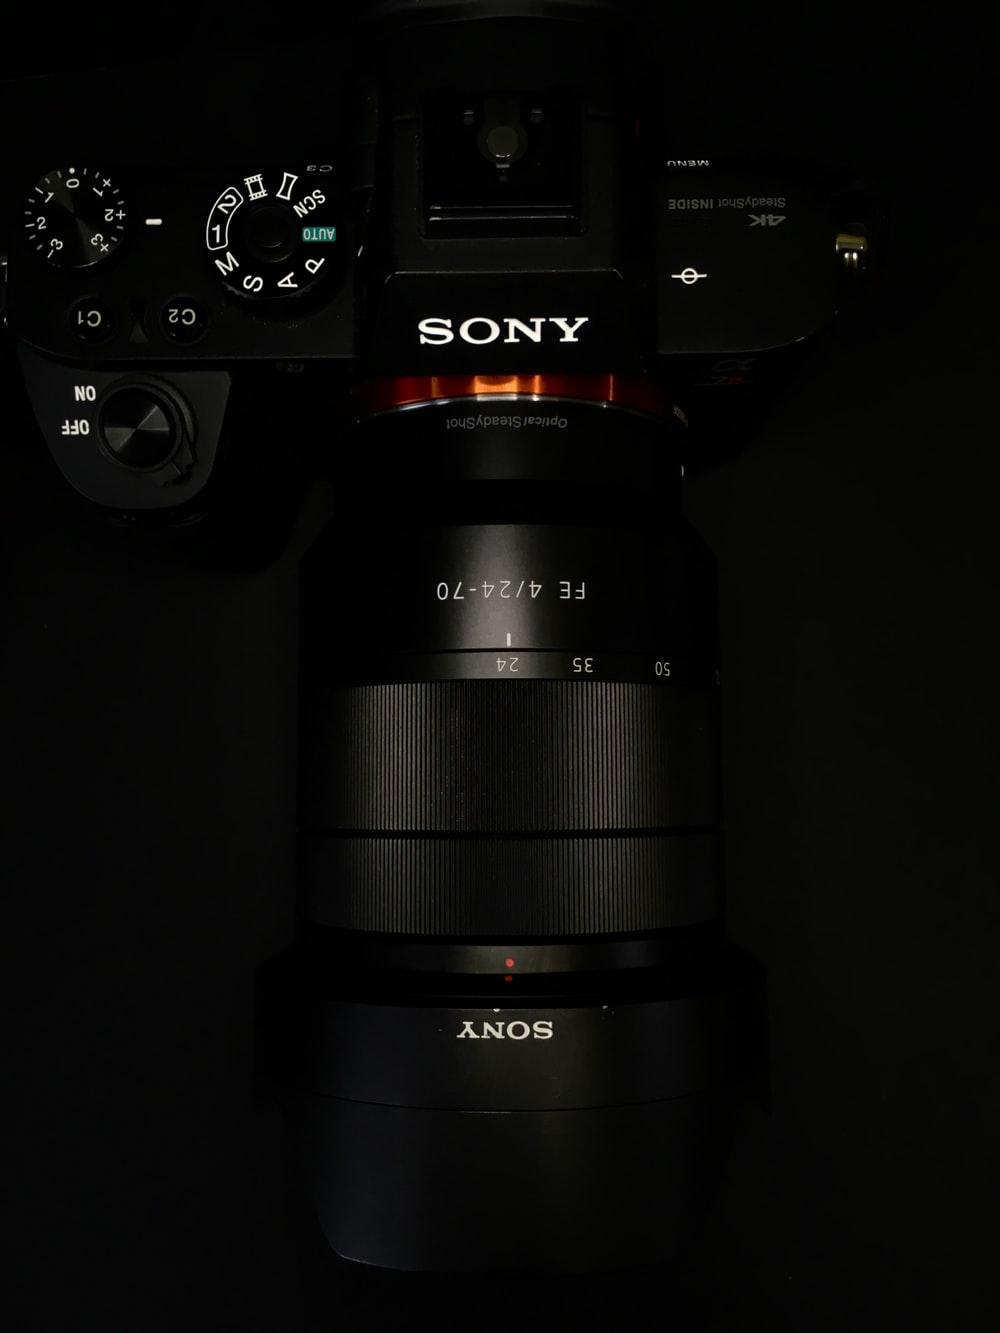 999+ Sony Camera Pictures | Download Free Images on Unsplash